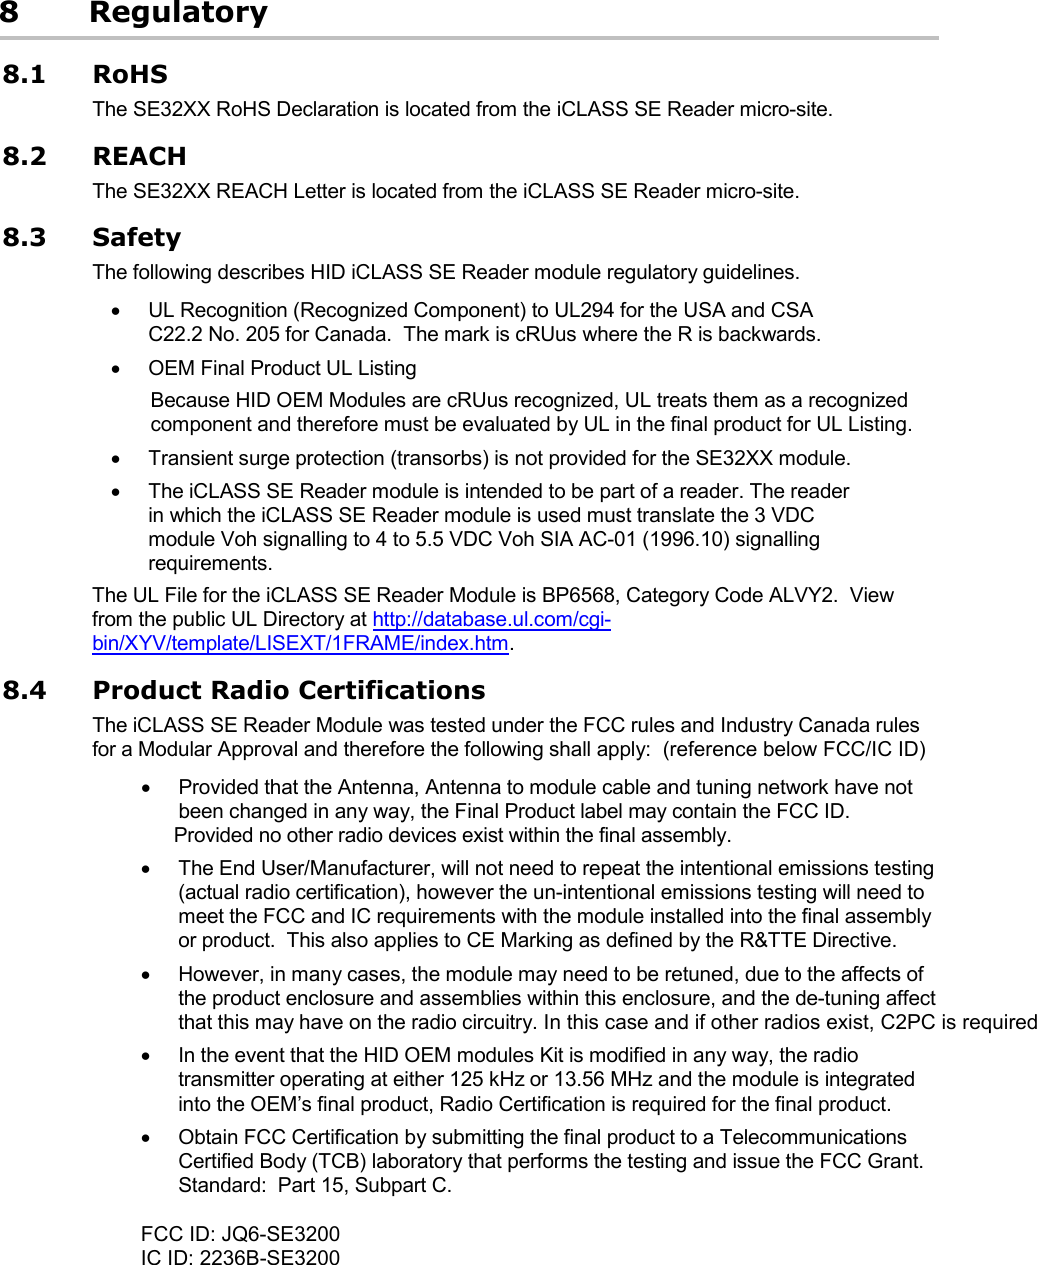 8 Regulatory 8.1 RoHS The SE32XX RoHS Declaration is located from the iCLASS SE Reader micro-site. 8.2 REACH The SE32XX REACH Letter is located from the iCLASS SE Reader micro-site. 8.3 Safety The following describes HID iCLASS SE Reader module regulatory guidelines. • UL Recognition (Recognized Component) to UL294 for the USA and CSA C22.2 No. 205 for Canada.  The mark is cRUus where the R is backwards.  • OEM Final Product UL Listing Because HID OEM Modules are cRUus recognized, UL treats them as a recognized component and therefore must be evaluated by UL in the final product for UL Listing. • Transient surge protection (transorbs) is not provided for the SE32XX module. • The iCLASS SE Reader module is intended to be part of a reader. The reader in which the iCLASS SE Reader module is used must translate the 3 VDC module Voh signalling to 4 to 5.5 VDC Voh SIA AC-01 (1996.10) signalling requirements. The UL File for the iCLASS SE Reader Module is BP6568, Category Code ALVY2.  View from the public UL Directory at http://database.ul.com/cgi-bin/XYV/template/LISEXT/1FRAME/index.htm. 8.4 Product Radio Certifications The iCLASS SE Reader Module was tested under the FCC rules and Industry Canada rules for a Modular Approval and therefore the following shall apply:  (reference below FCC/IC ID)• Provided that the Antenna, Antenna to module cable and tuning network have not been changed in any way, the Final Product label may contain the FCC ID.       Provided no other radio devices exist within the final assembly.  • The End User/Manufacturer, will not need to repeat the intentional emissions testing (actual radio certification), however the un-intentional emissions testing will need to meet the FCC and IC requirements with the module installed into the final assembly or product.  This also applies to CE Marking as defined by the R&amp;TTE Directive.• However, in many cases, the module may need to be retuned, due to the affects of the product enclosure and assemblies within this enclosure, and the de-tuning affect that this may have on the radio circuitry. In this case and if other radios exist, C2PC is required• In the event that the HID OEM modules Kit is modified in any way, the radio transmitter operating at either 125 kHz or 13.56 MHz and the module is integrated into the OEM’s final product, Radio Certification is required for the final product. • Obtain FCC Certification by submitting the final product to a Telecommunications Certified Body (TCB) laboratory that performs the testing and issue the FCC Grant.  Standard:  Part 15, Subpart C.       FCC ID: JQ6-SE3200IC ID: 2236B-SE3200 